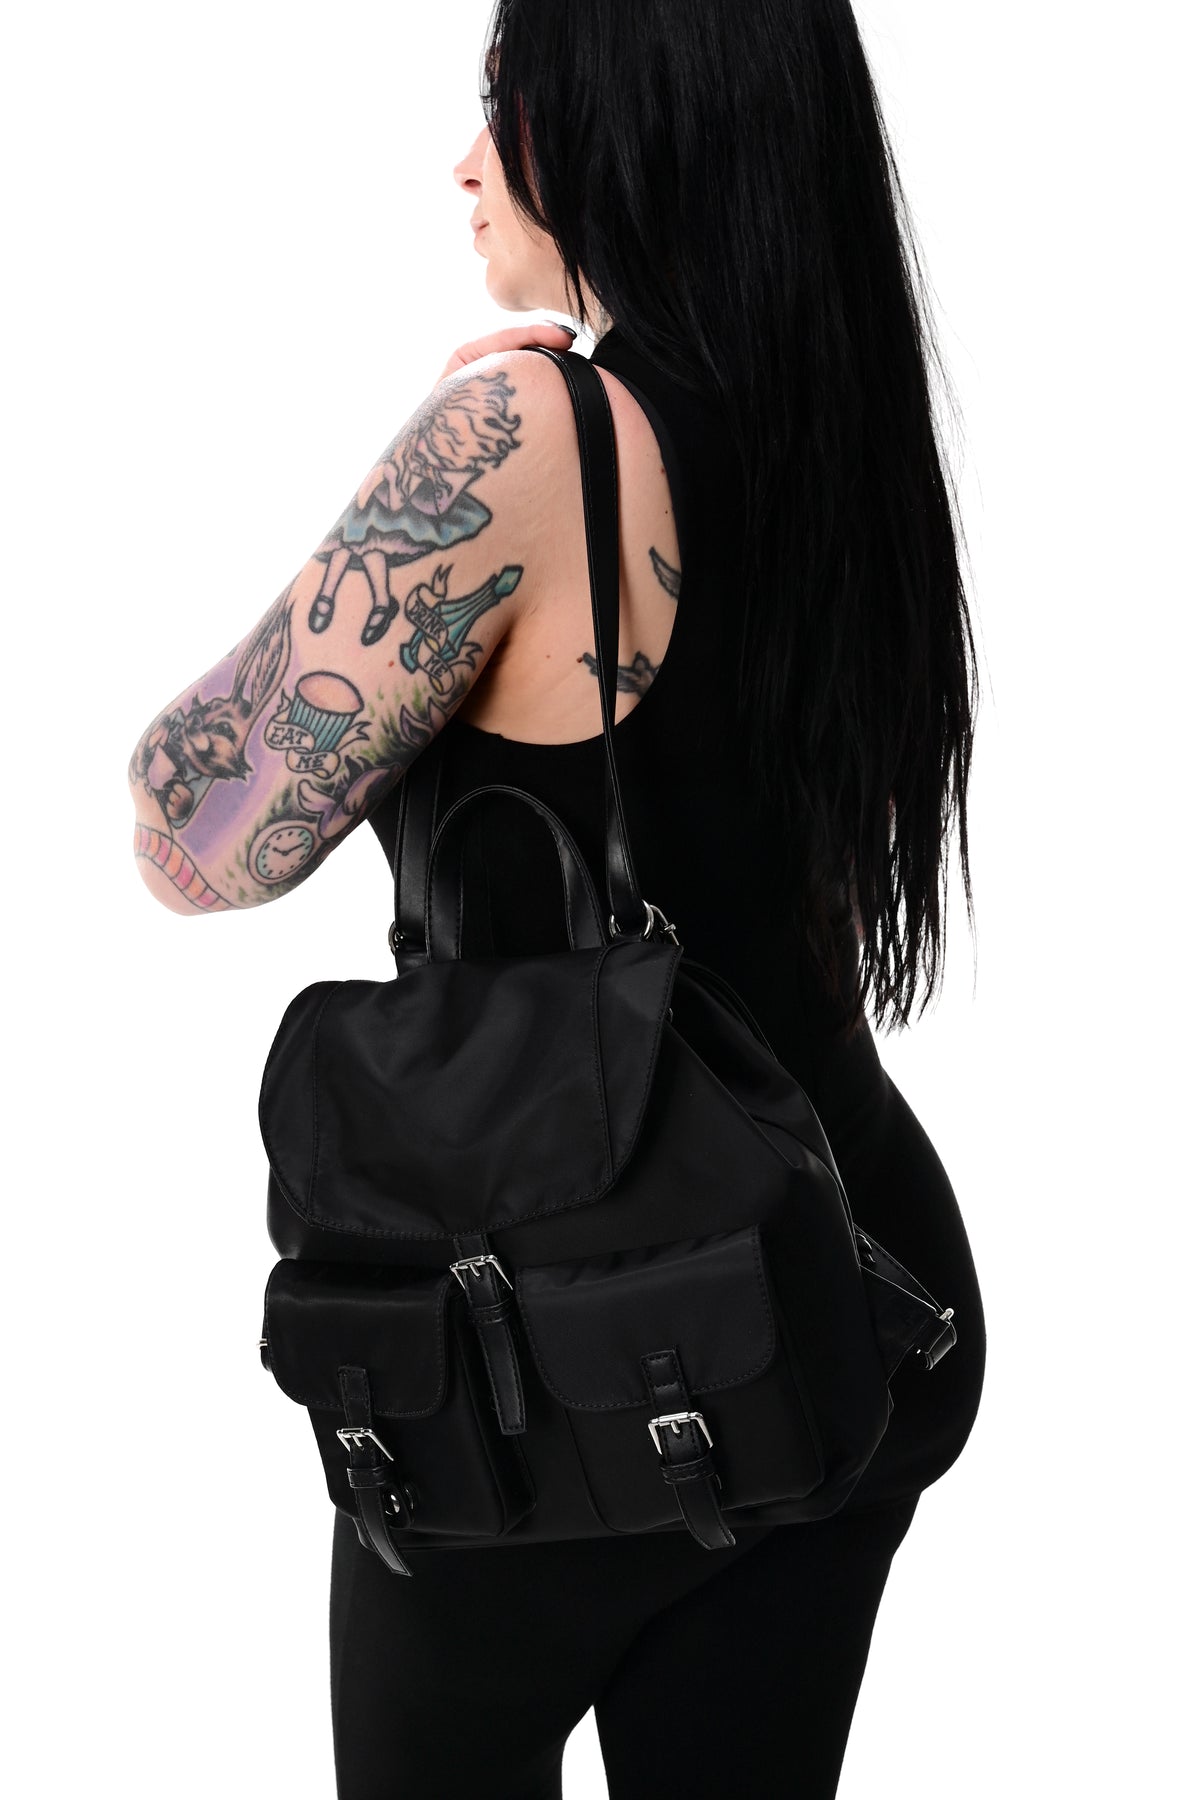 black nylon backpack with front pockets